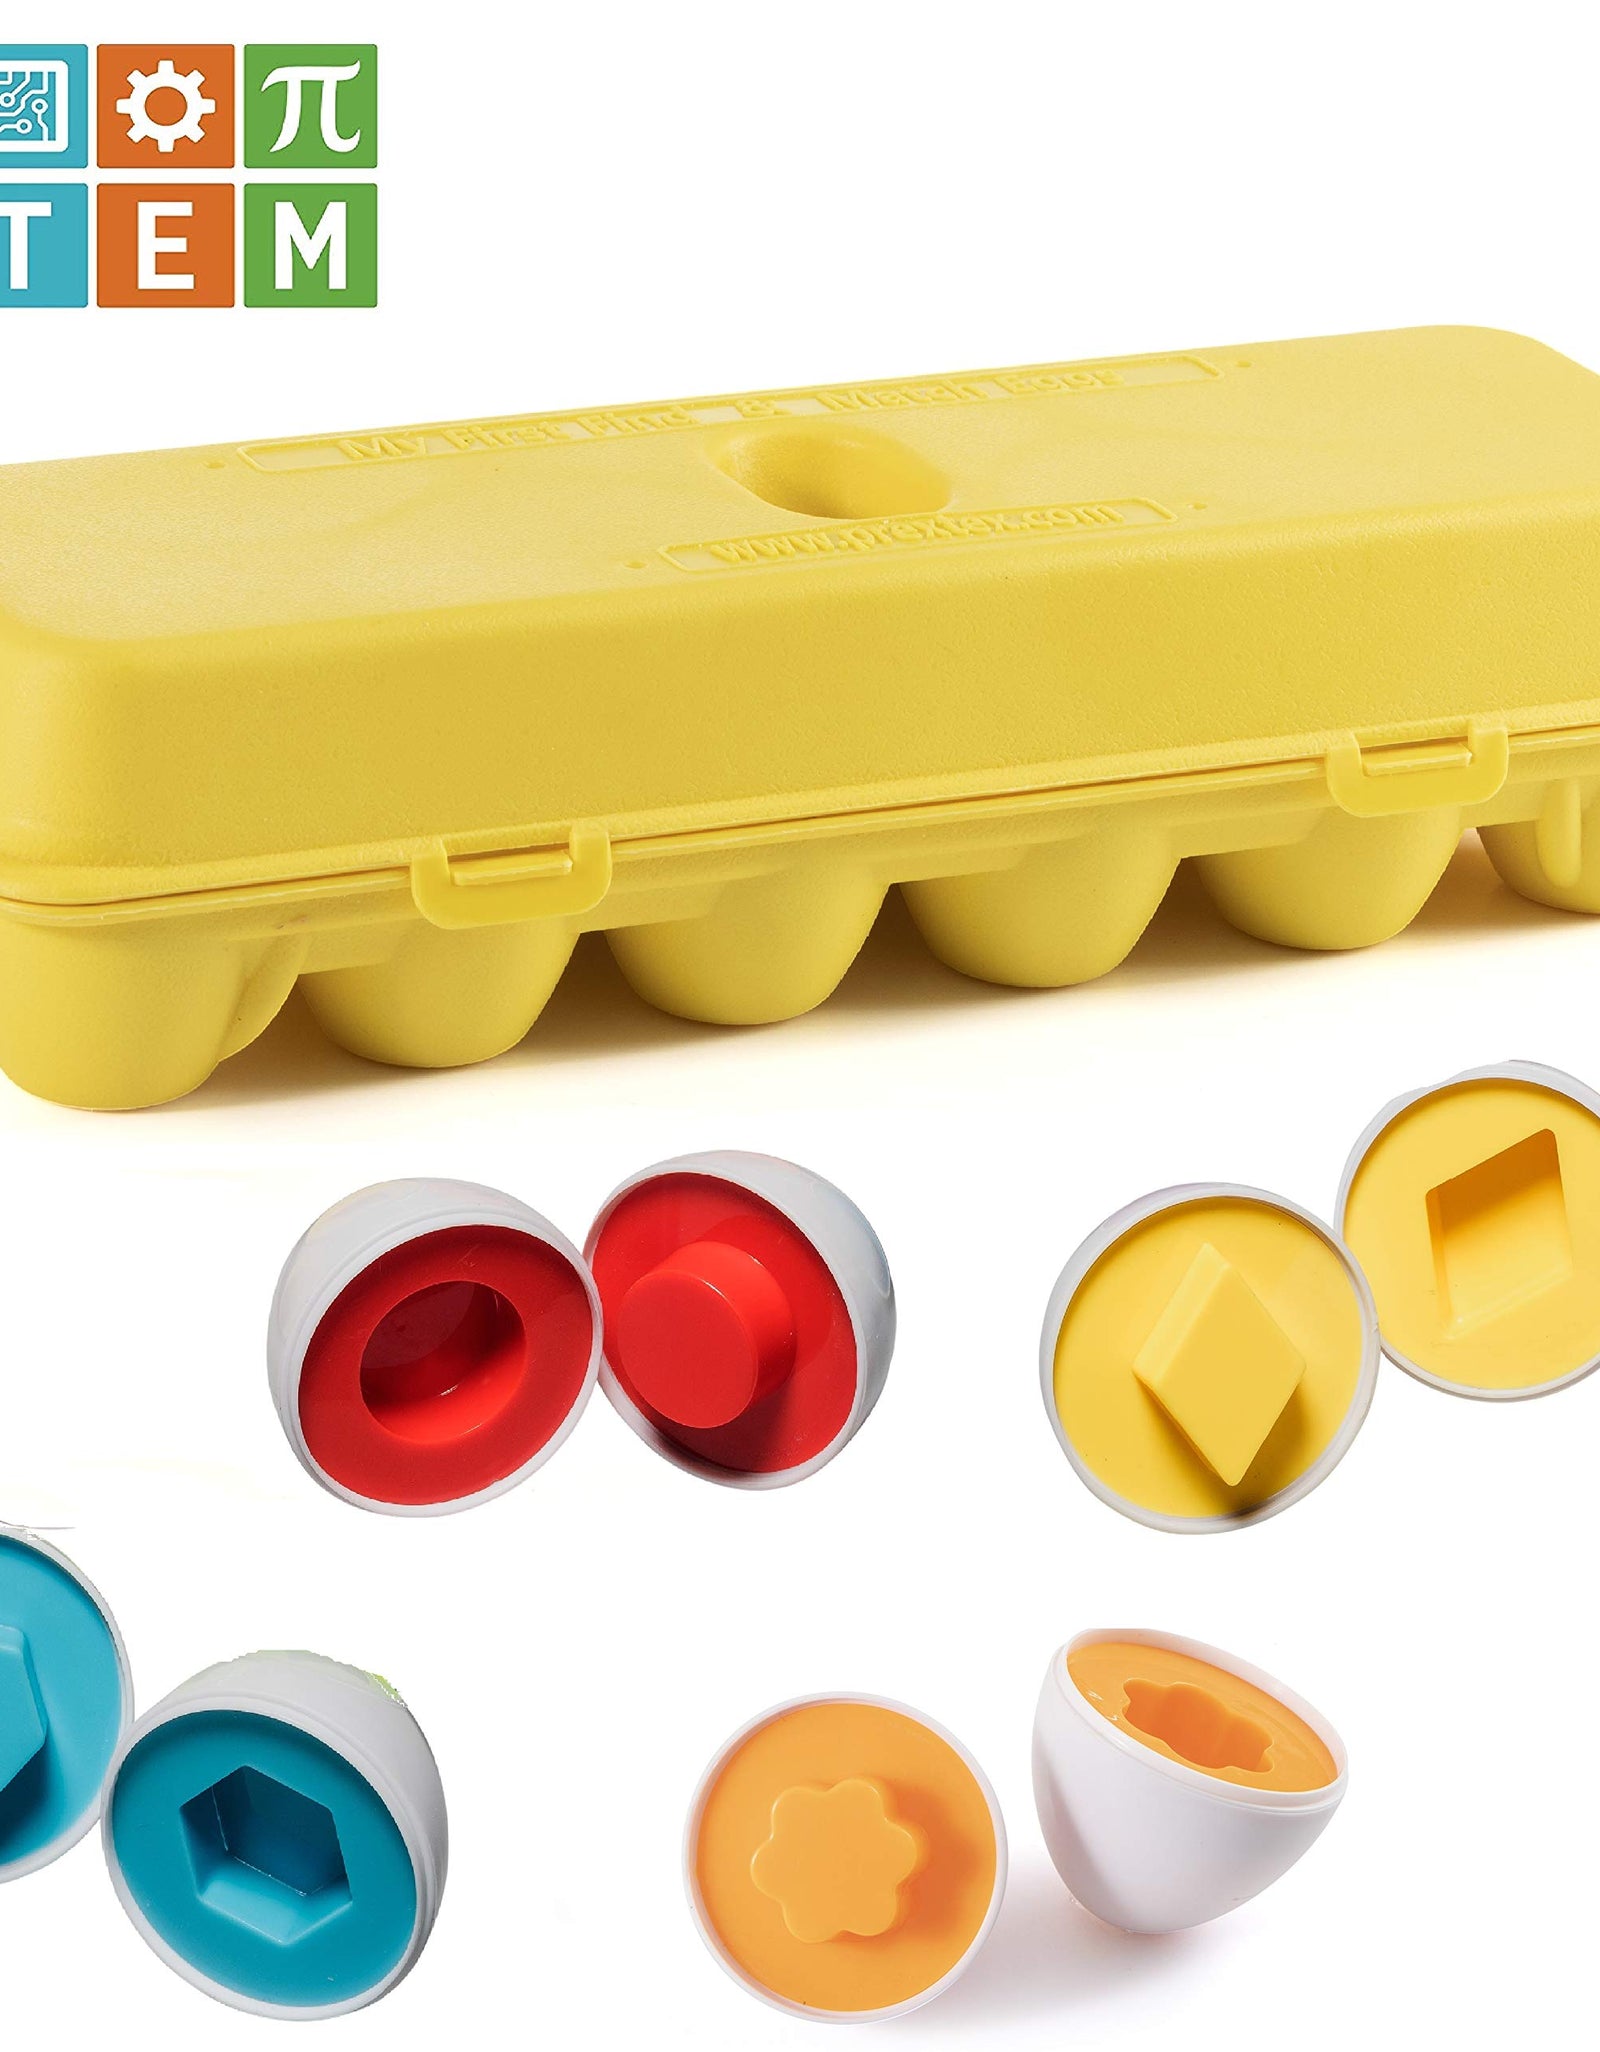 Prextex My First Find and Match Easter Matching Eggs with Yellow Eggs Holder - STEM Toys Educational Toy for Kids and Toddlers to Learn About Shapes and Colors Easter Gift